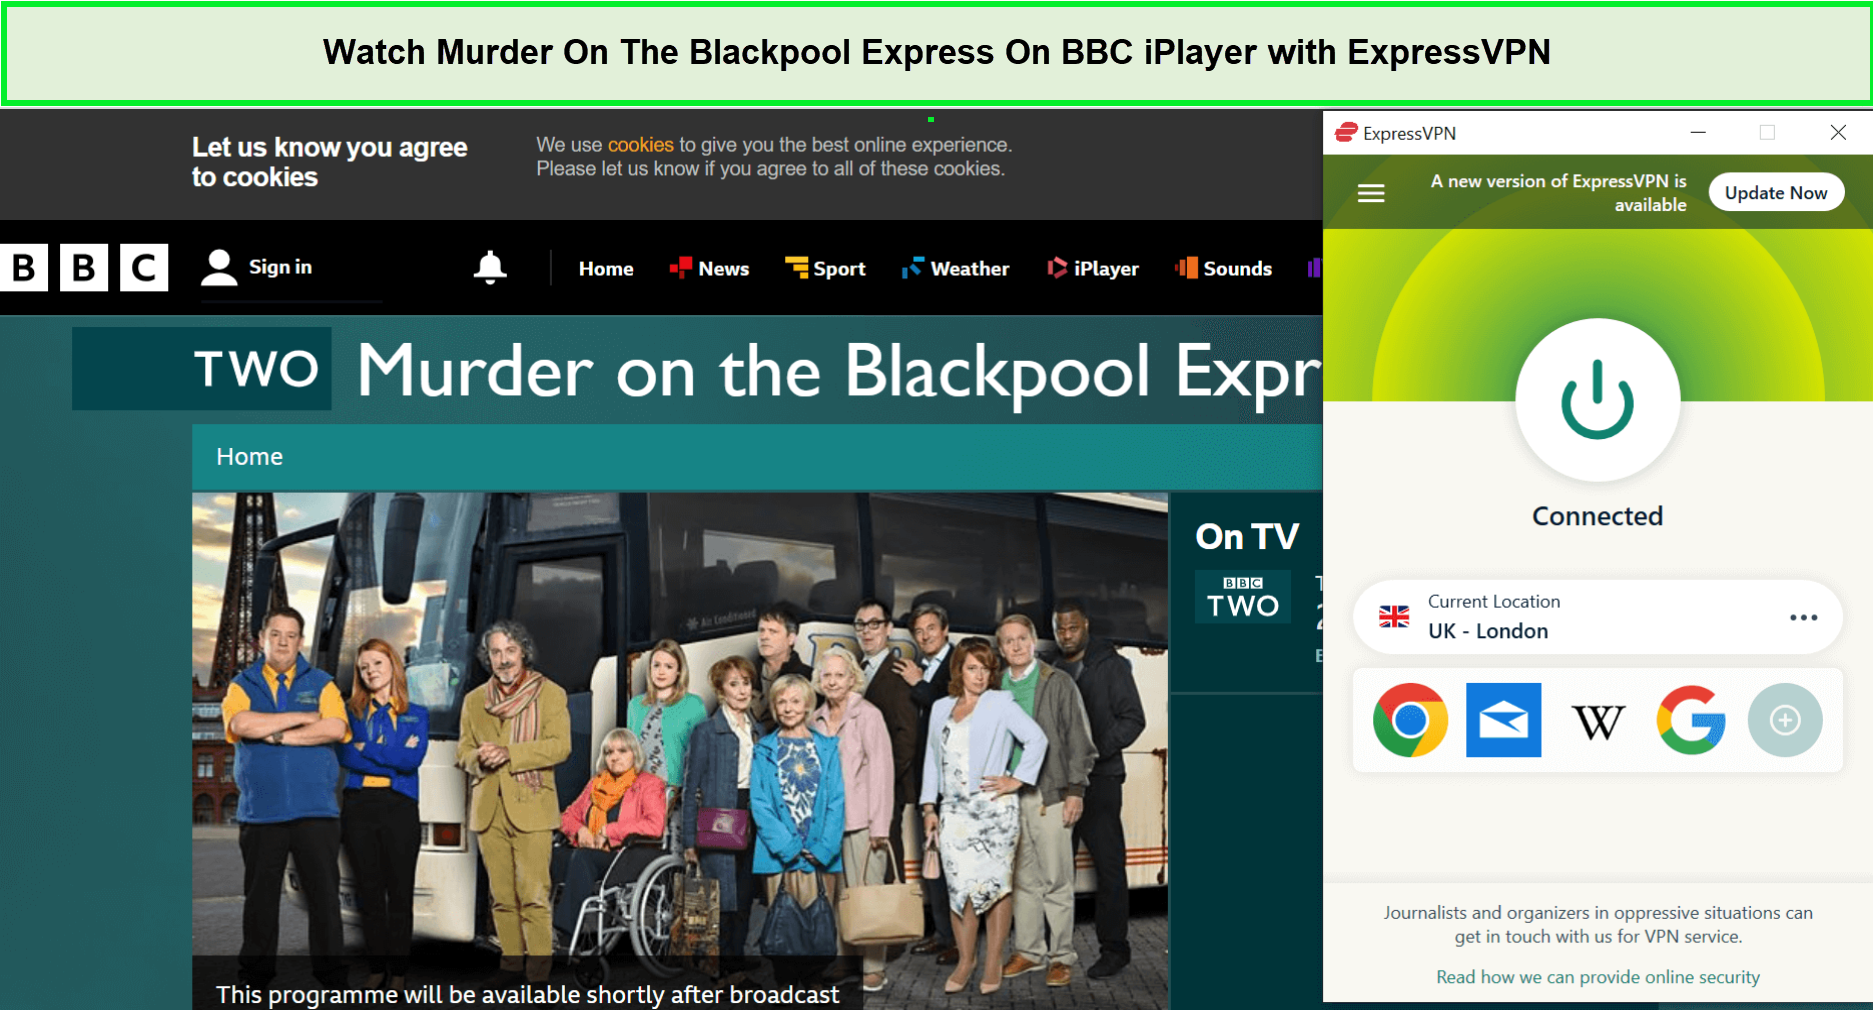 Watch-Murder-On-The-Blackpool-Express-in-South Korea-On-BBC-iPlayer-with-ExpressVPN